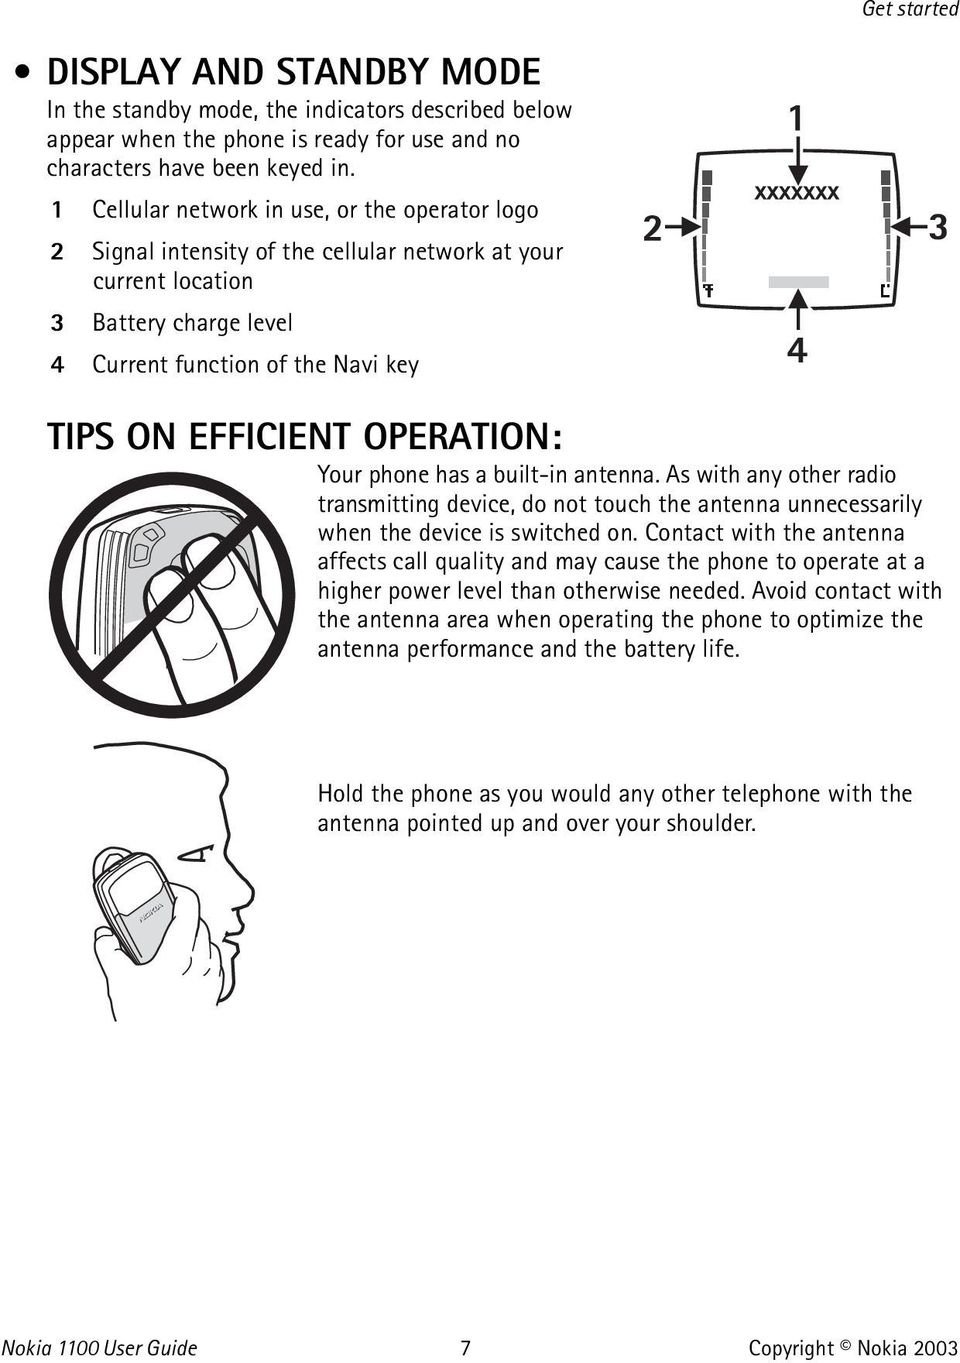 OPERATION: Your phone has a built-in antenna. As with any other radio transmitting device, do not touch the antenna unnecessarily when the device is switched on.